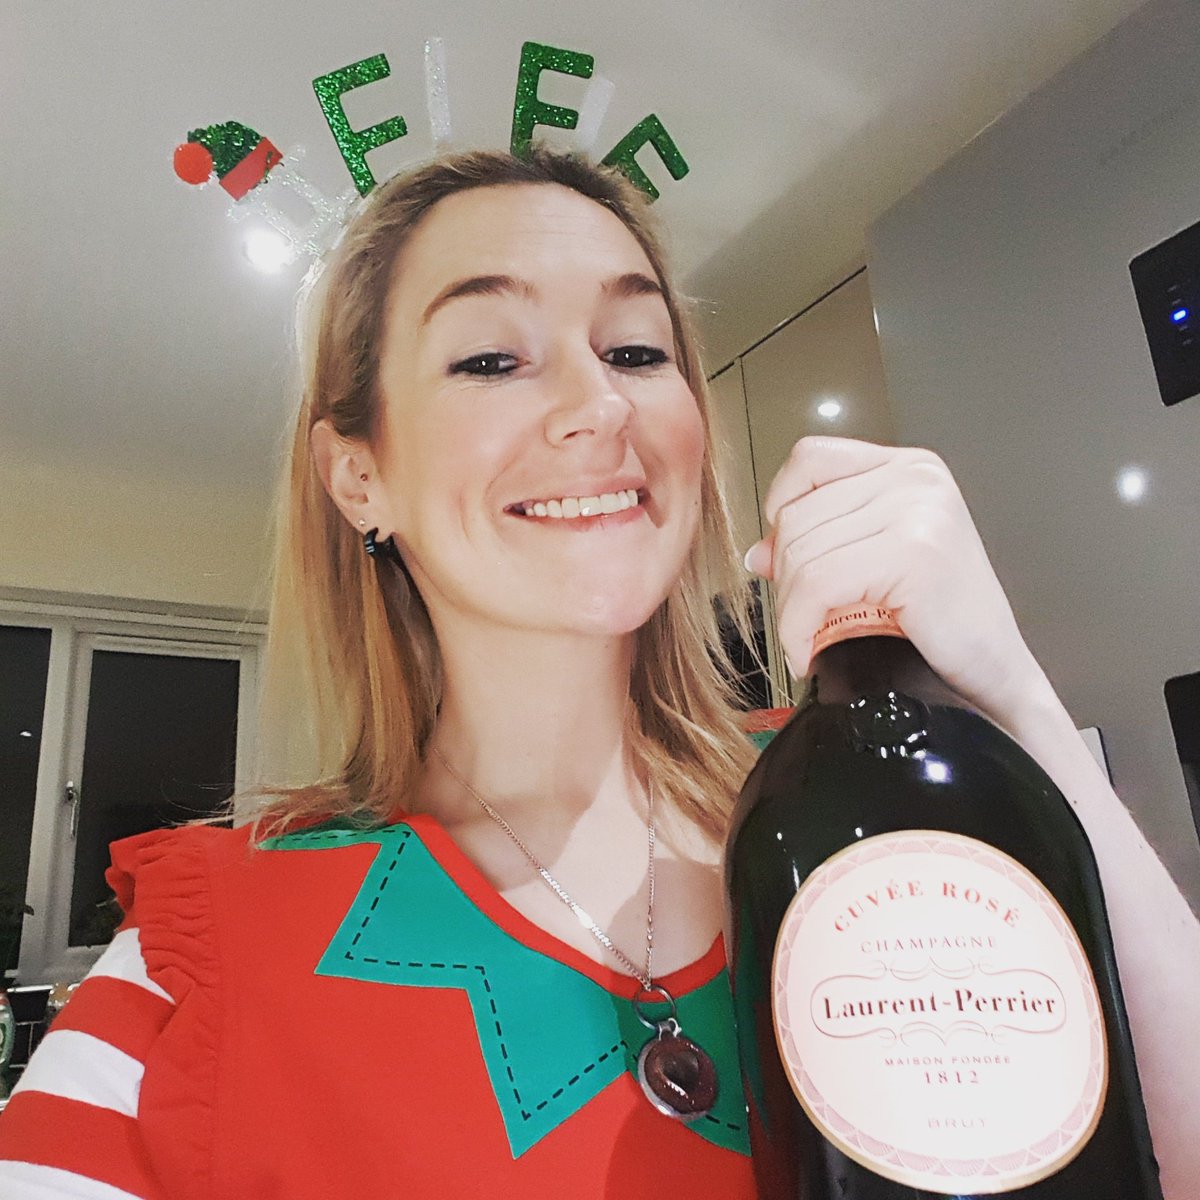 Thank you to the #subbie who bought Me this #champagne it's gorgeous!!!! 🤗😍

#elfie #selfie #christmasMistress #Dommelife #spoiltMistress 

🤗🎁🥂🍾🎅🎉👠